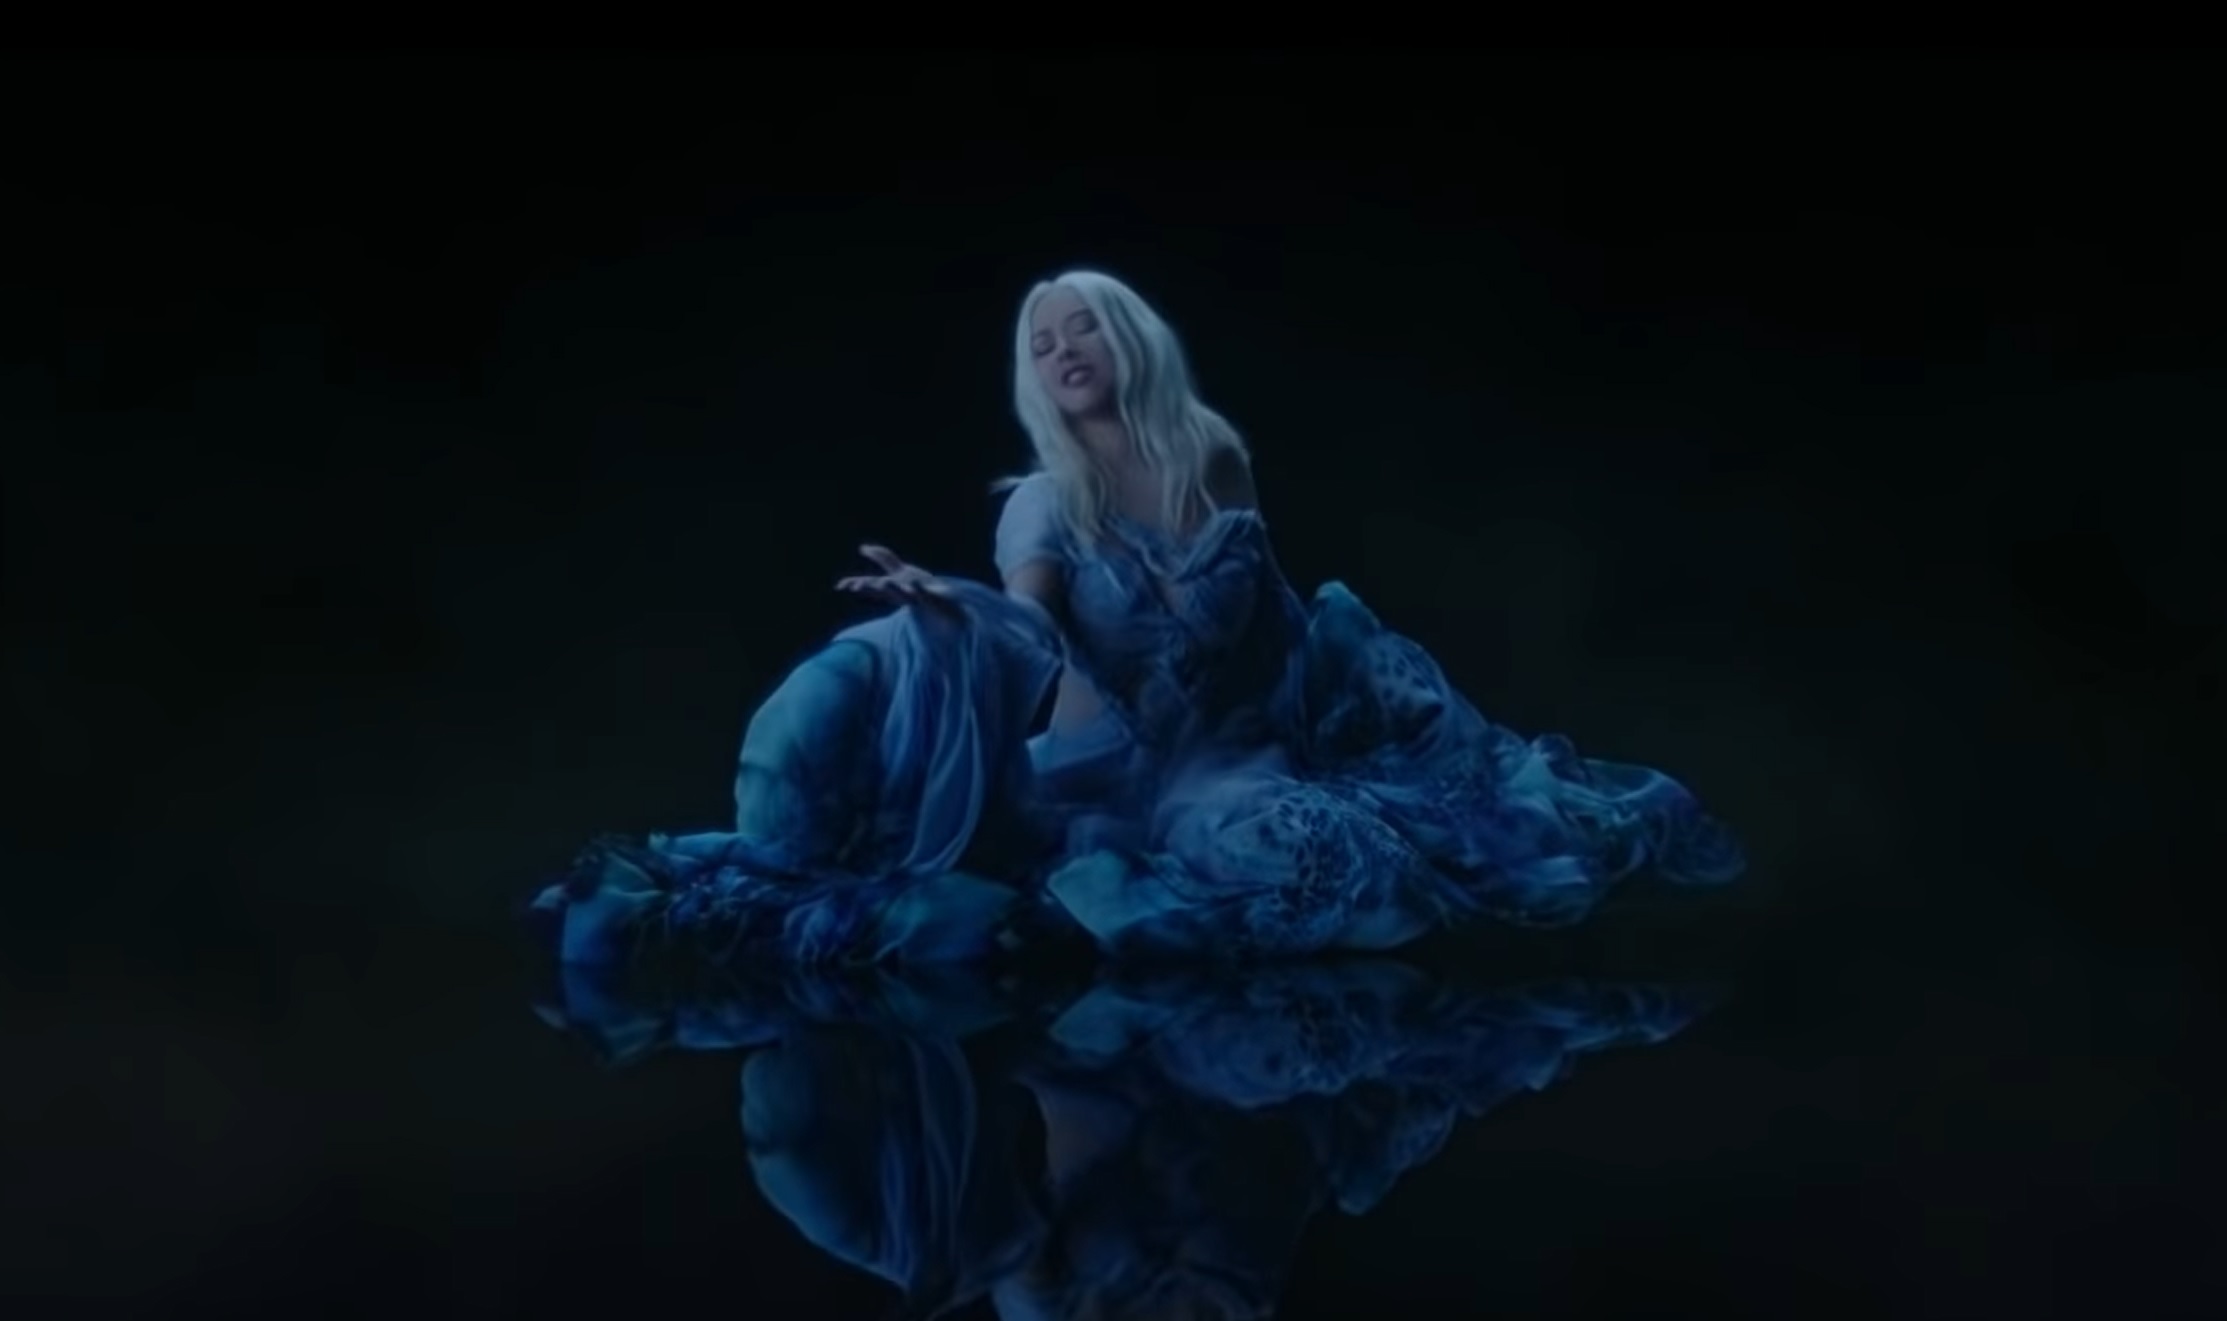 Christina Aguilera wears a blue dress inspired by the ocean from Iris Van Herpen’s Sensory Seas collection. Image: DisneyMusicVEVO / YouTube